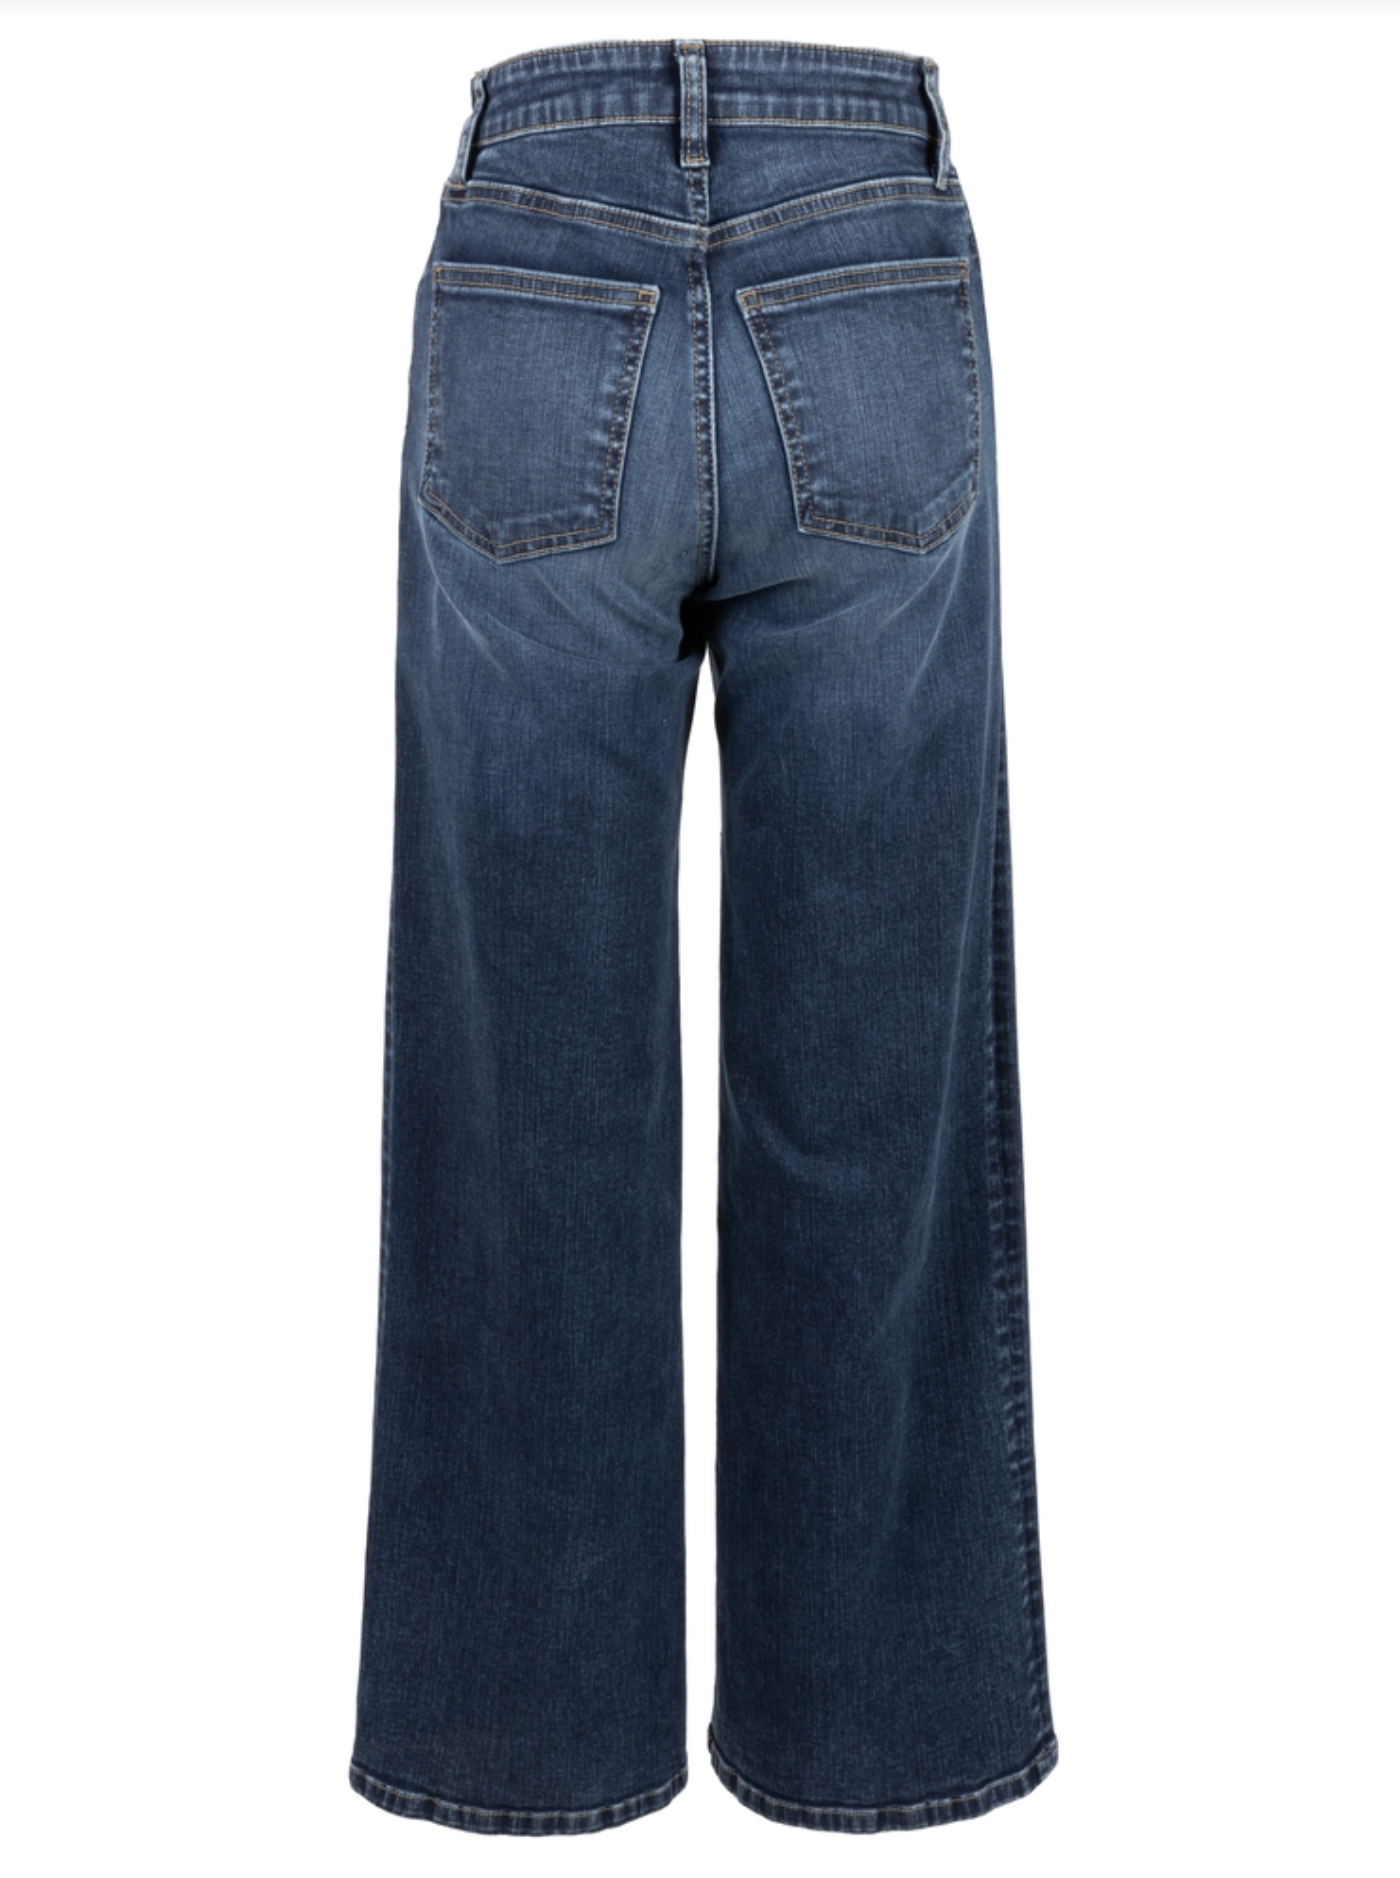 Jean High Rise Wide Leg Jeans - Expertise